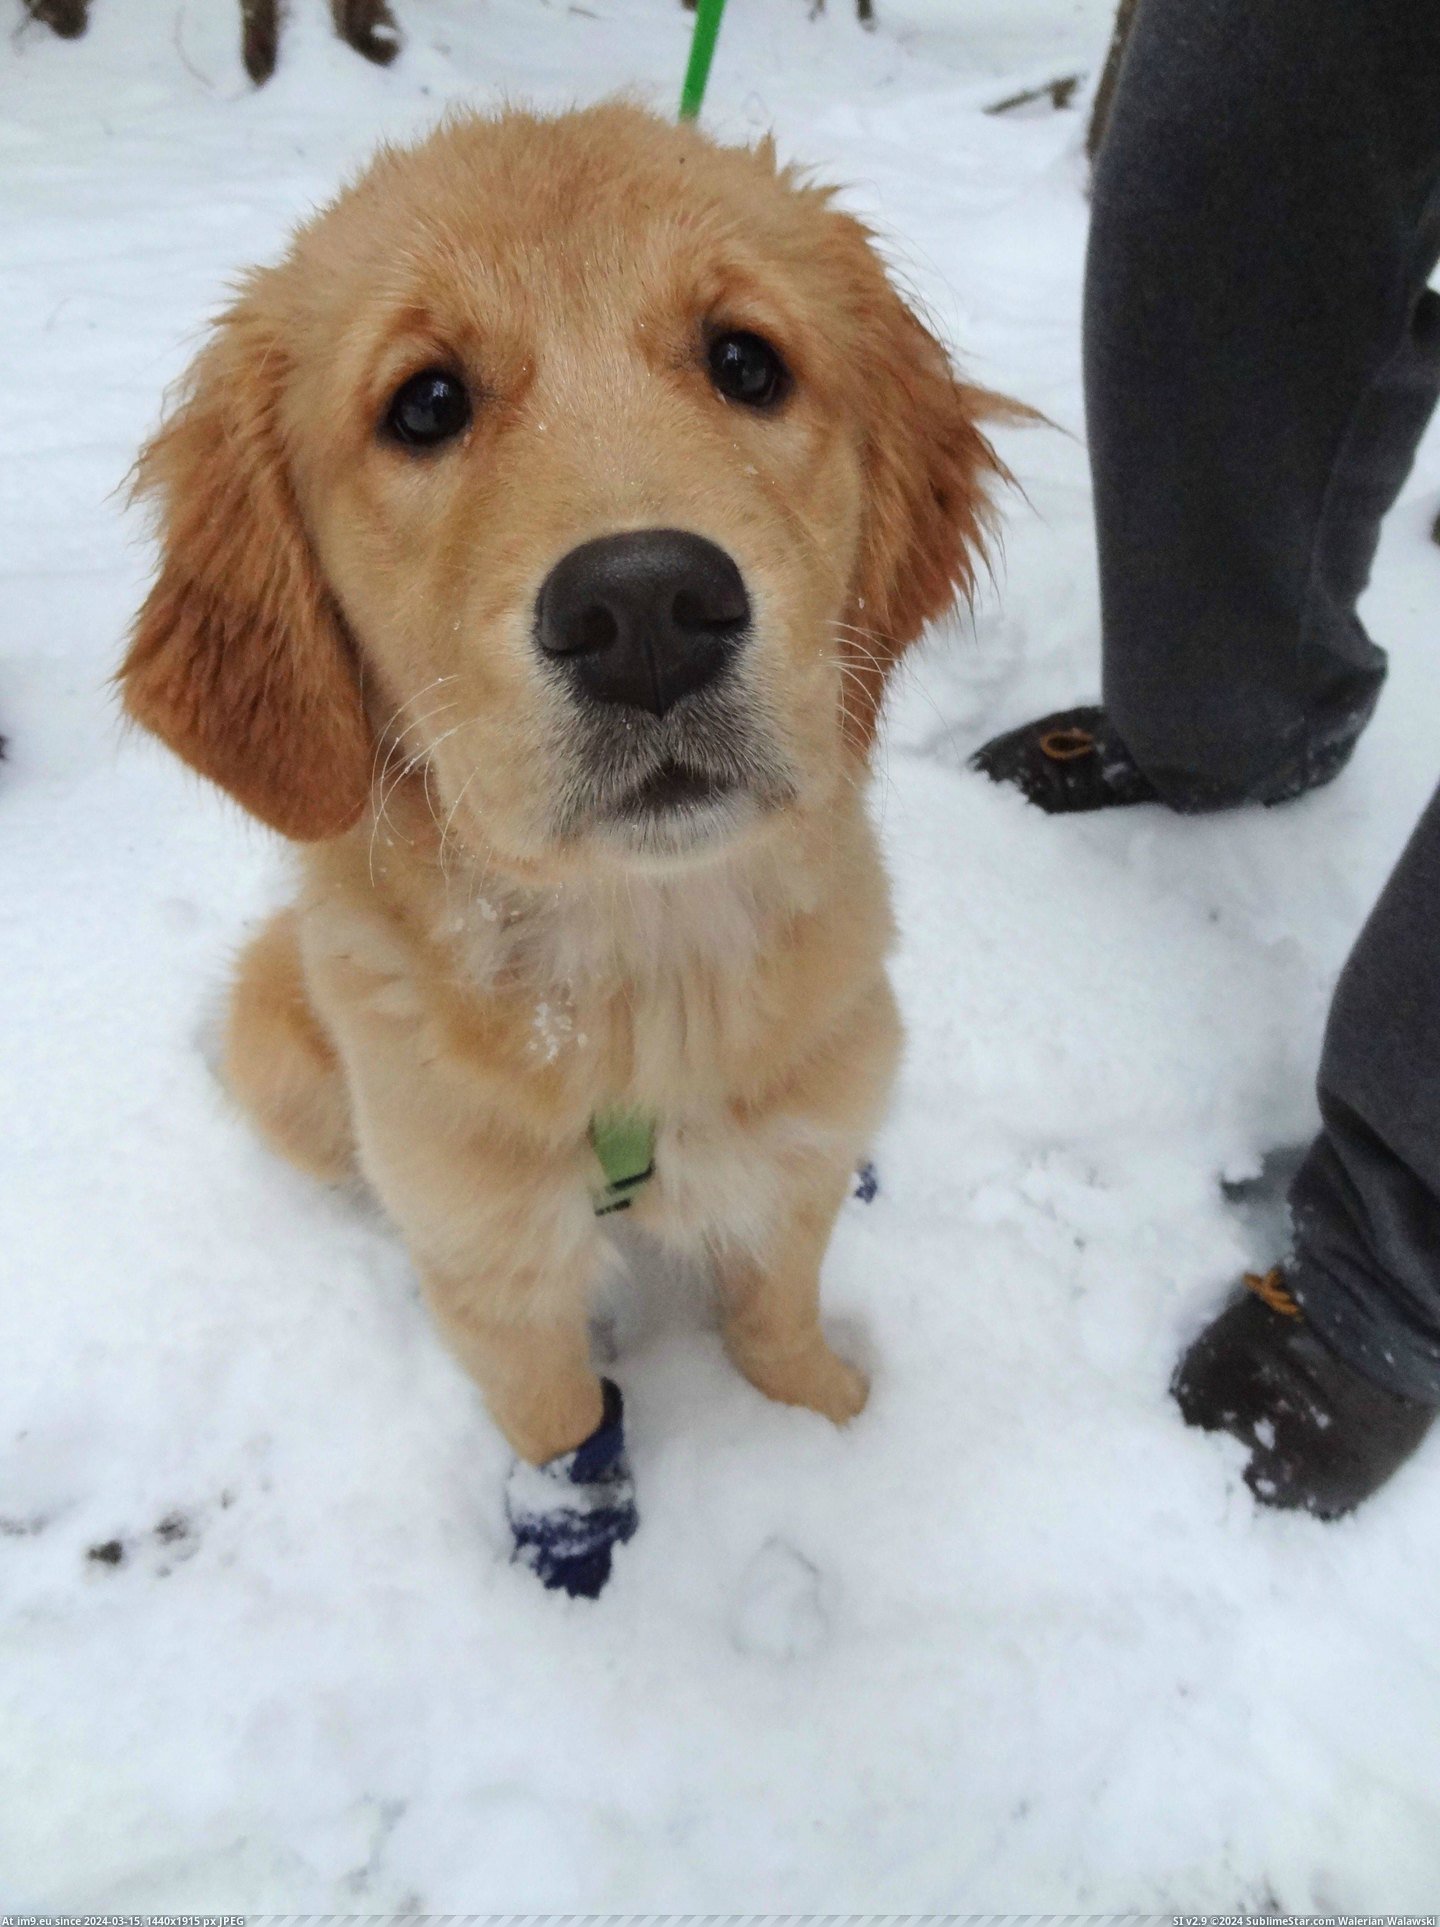 #One #Old #Eyes #Golden #Month #Walk #Booties #Snow #Our #Lost [Aww] My four-month-old Golden lost one of her booties on our walk in the snow. Those eyes! Pic. (Bild von album My r/AWW favs))